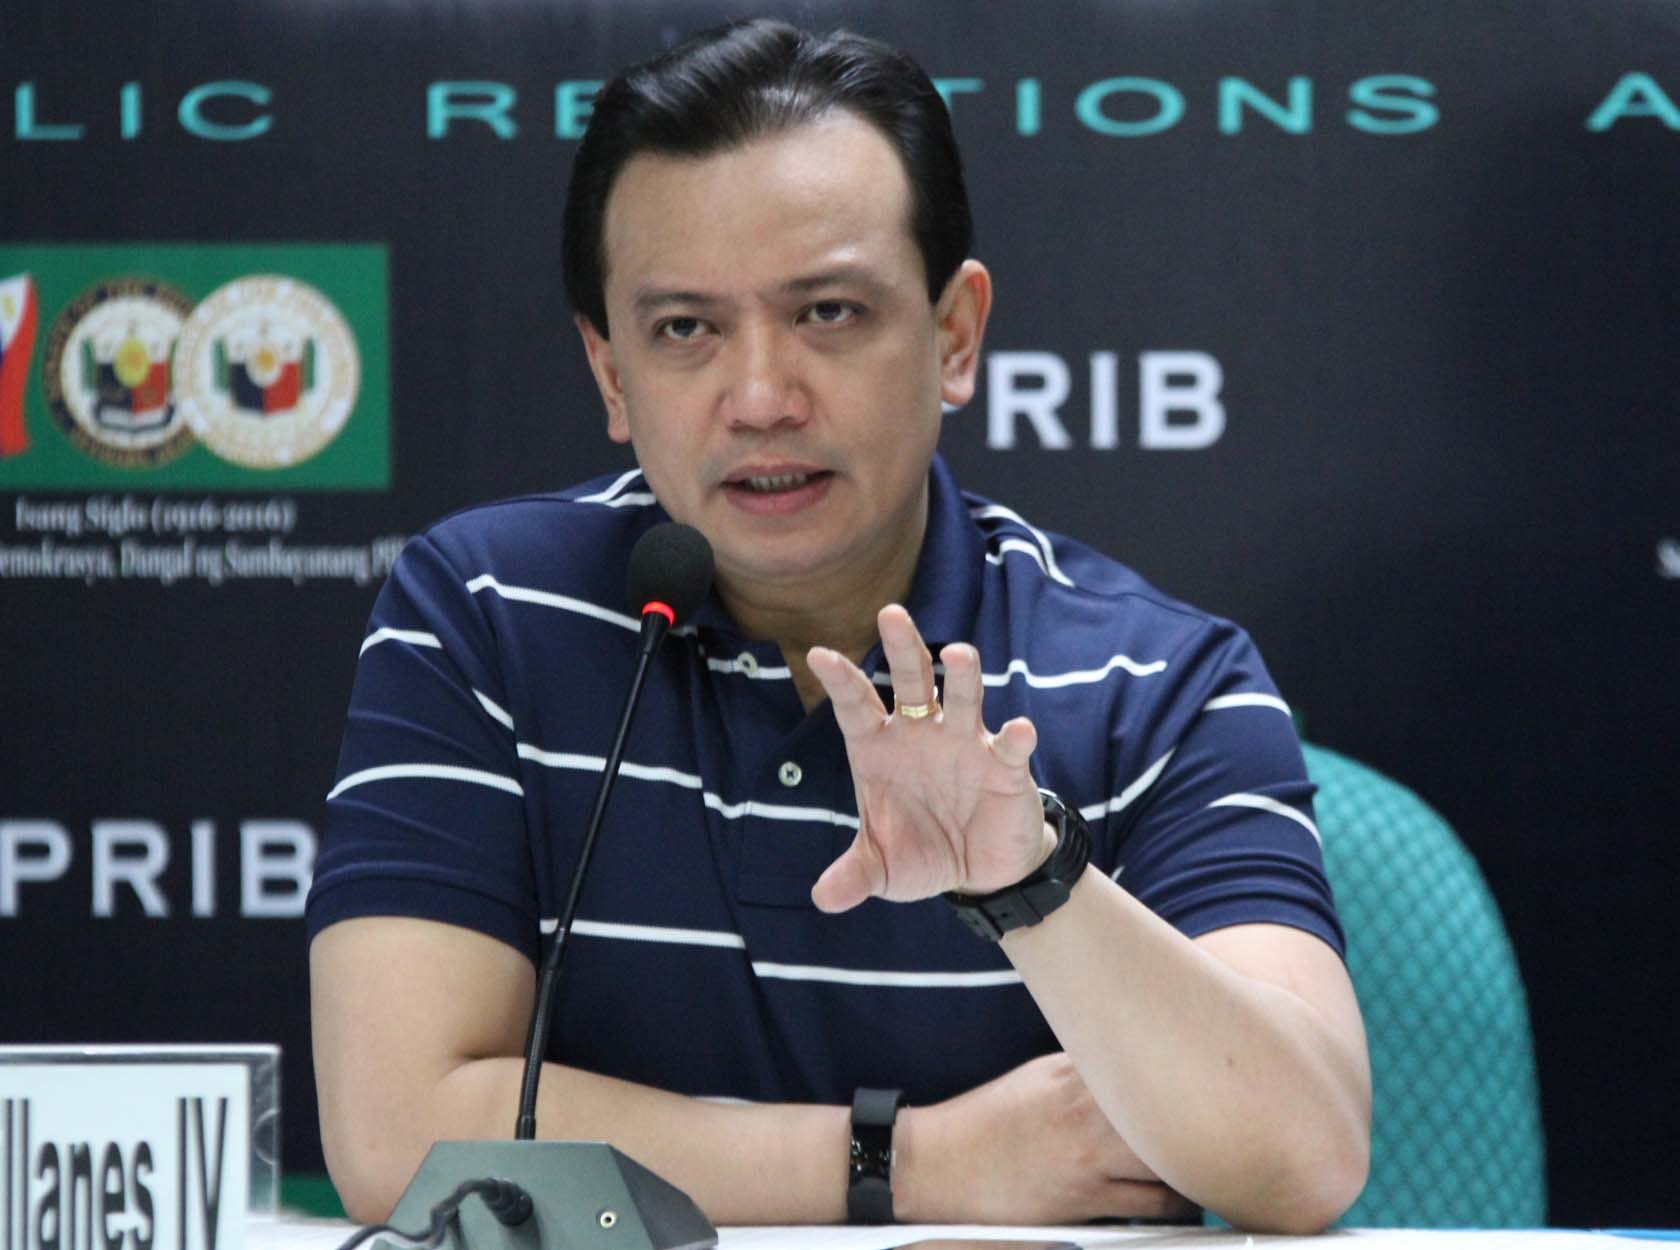 Trillanes seeks to increase combat pay for soldiers